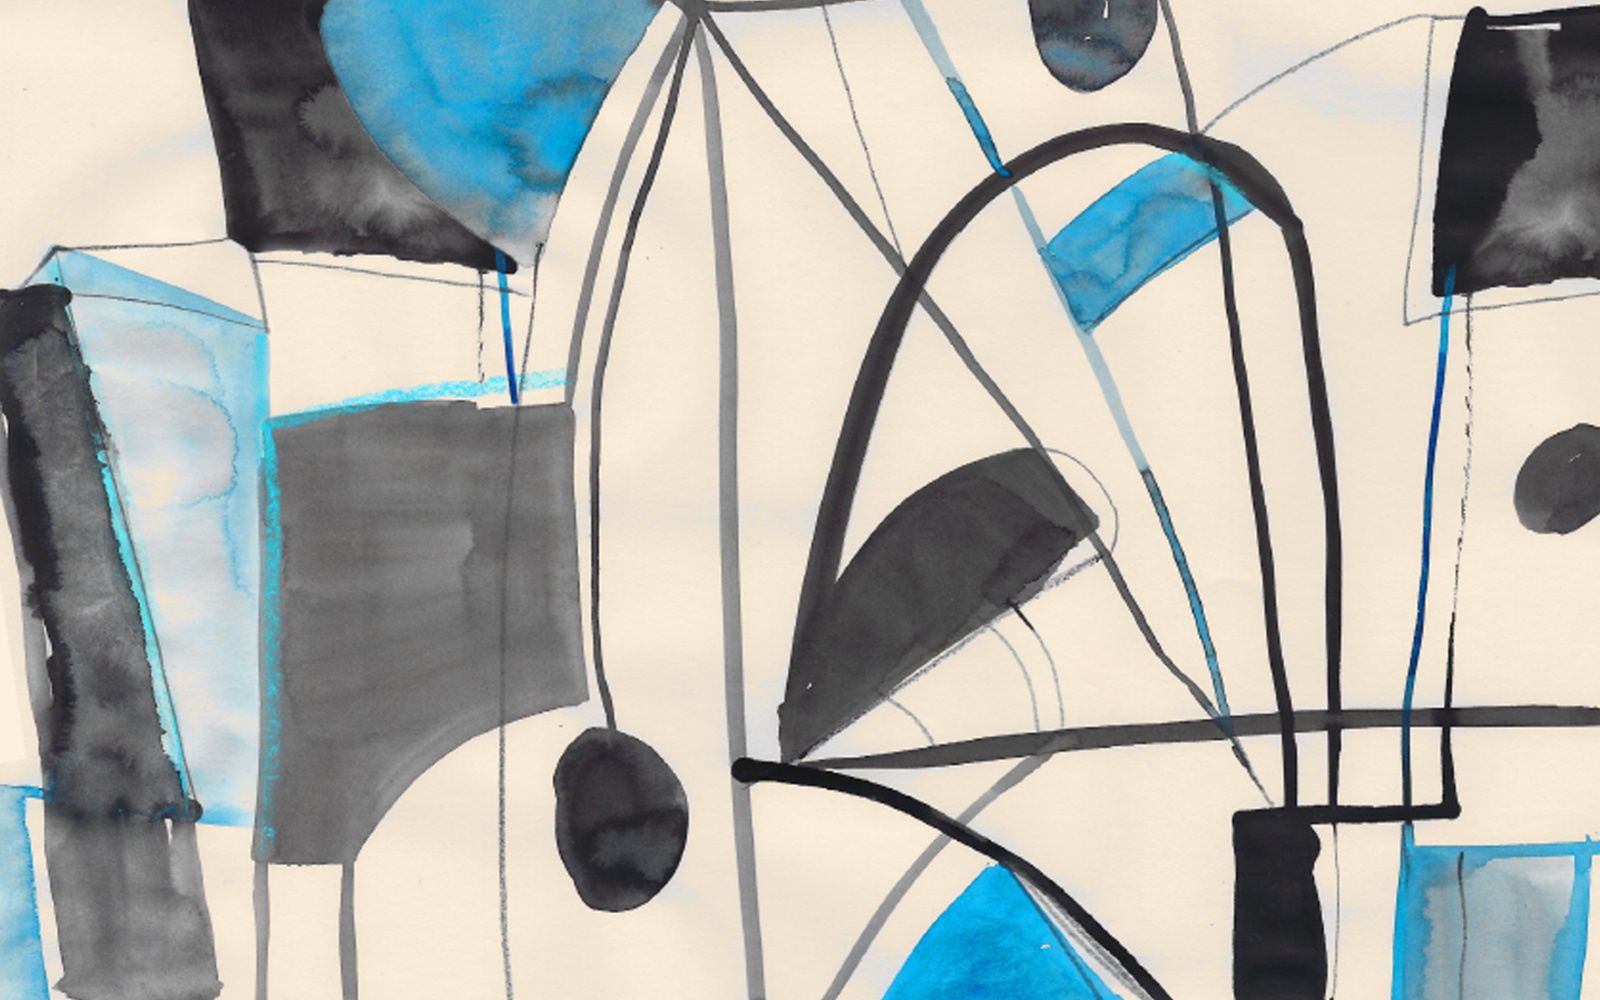 An abstract painting with black and blue forms against a white background.